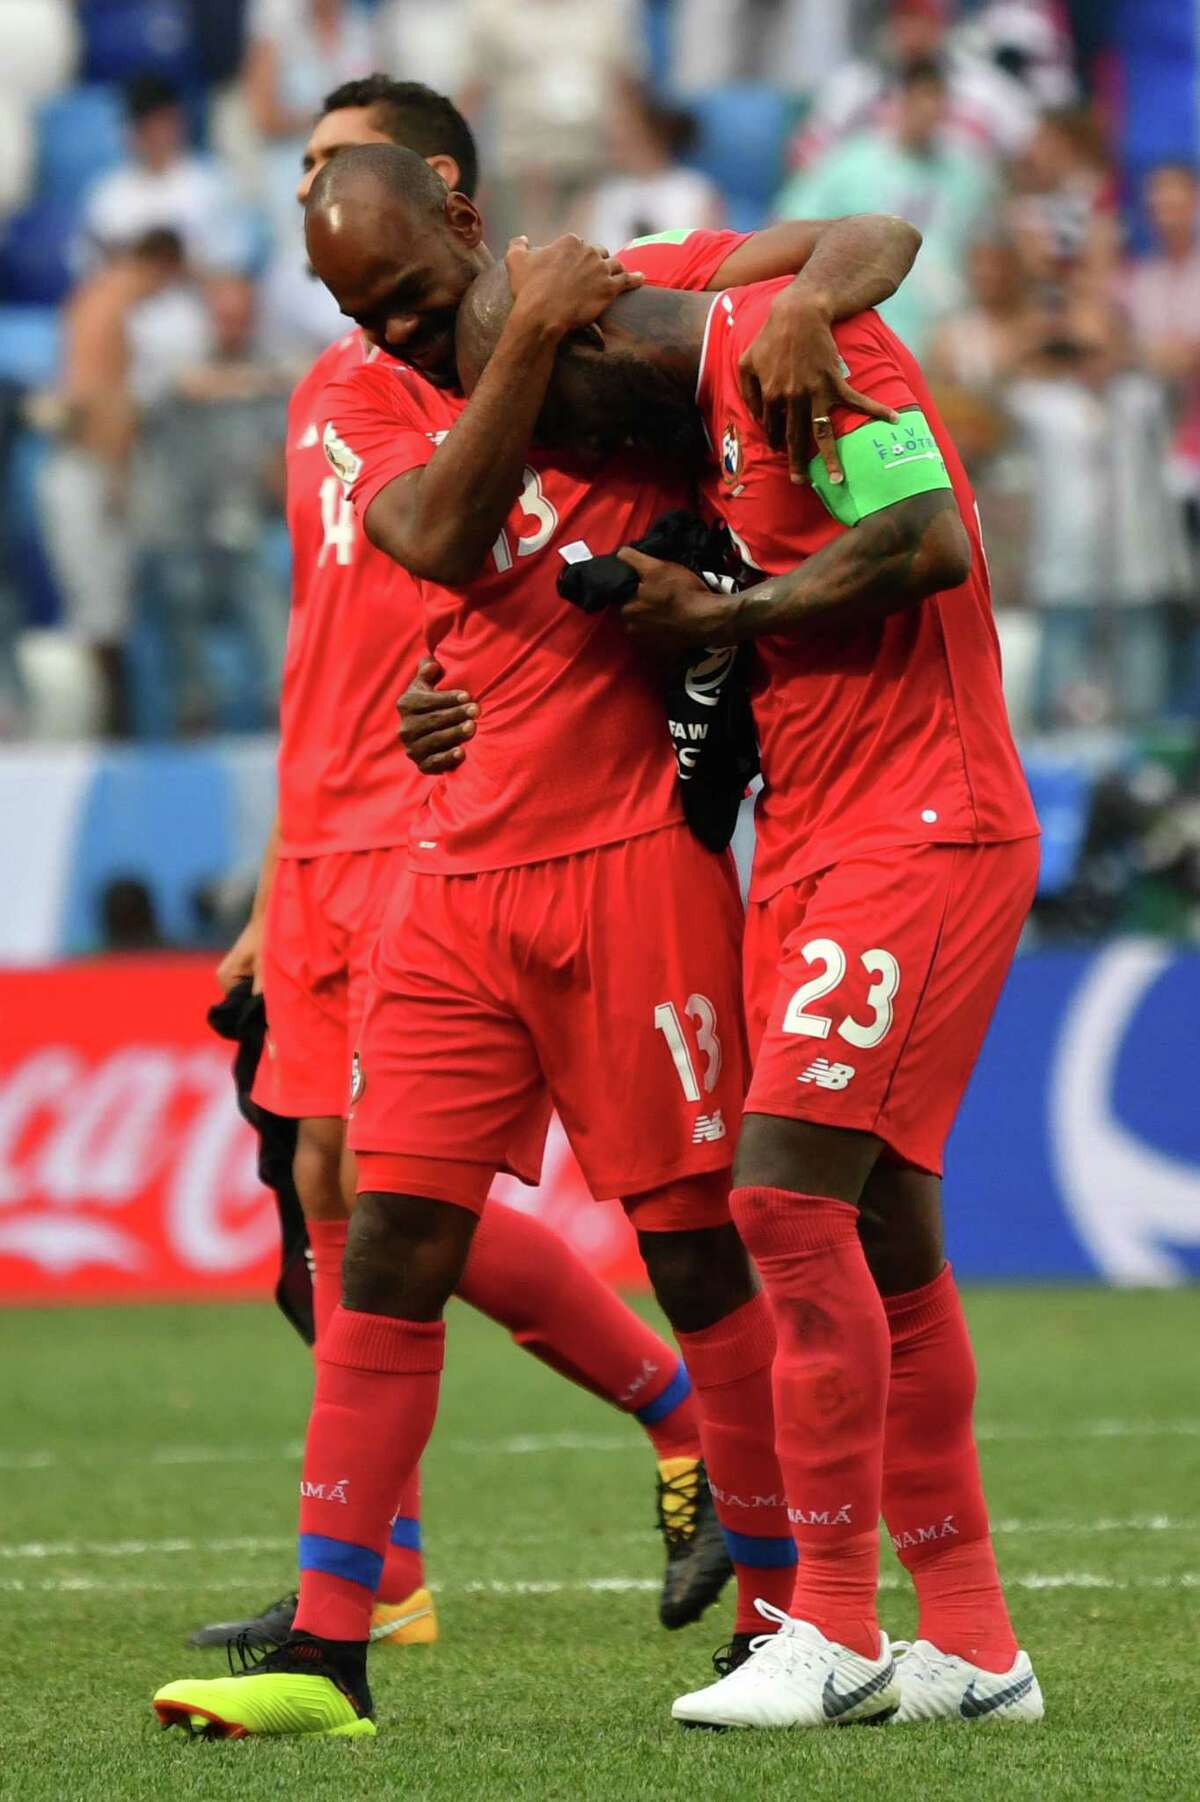 Panama's defender Felipe Baloy (R) and Panama's defender Adolfo Machado (C) react after losing the Russia 2018 World Cup Group G football match between England and Panama at the Nizhny Novgorod Stadium in Nizhny Novgorod on June 24, 2018. / AFP PHOTO / Dimitar DILKOFF / RESTRICTED TO EDITORIAL USE - NO MOBILE PUSH ALERTS/DOWNLOADSDIMITAR DILKOFF/AFP/Getty Images